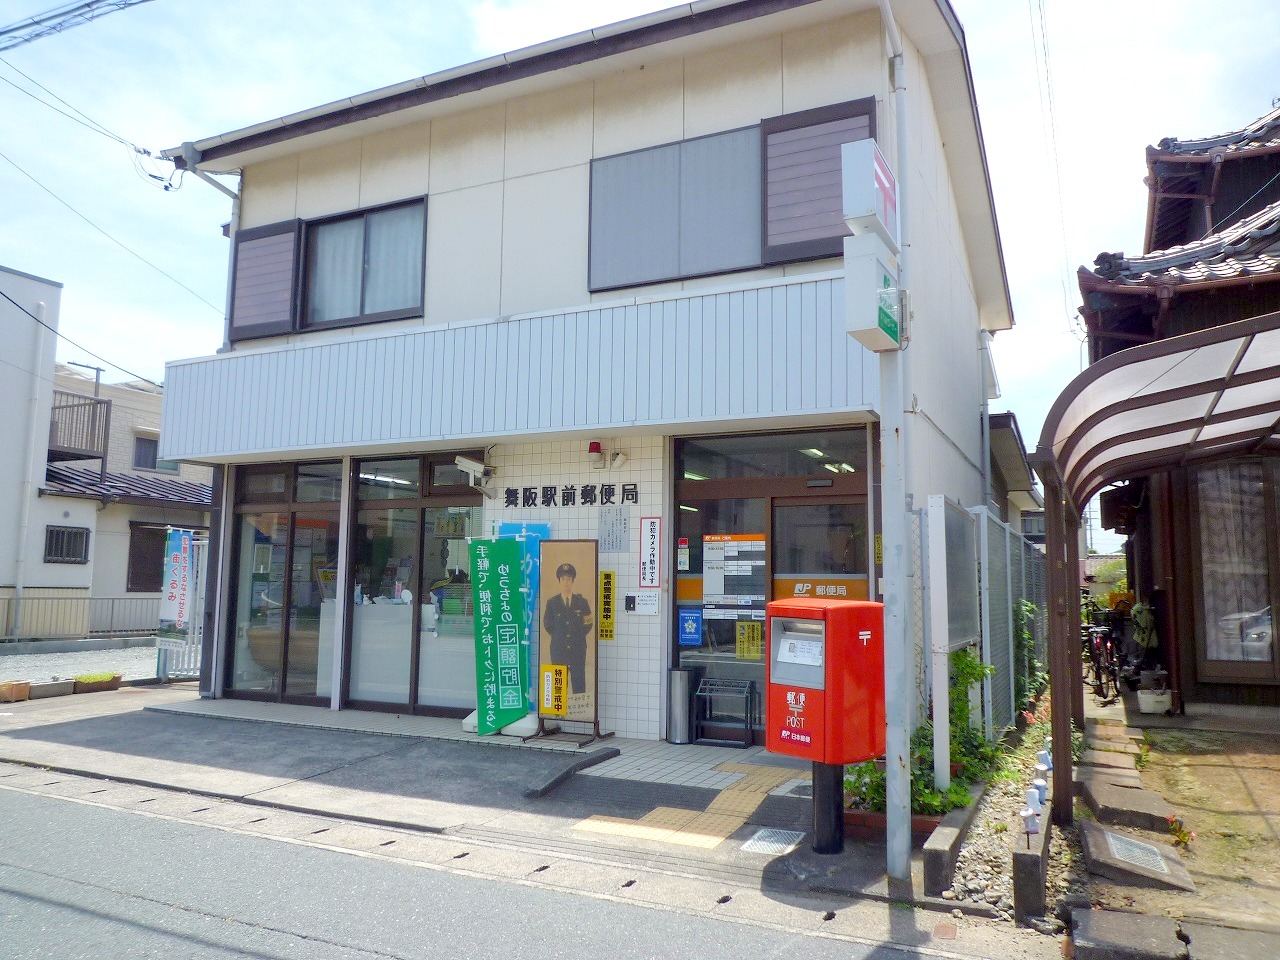 post office. Maisaka until Station post office (post office) 296m